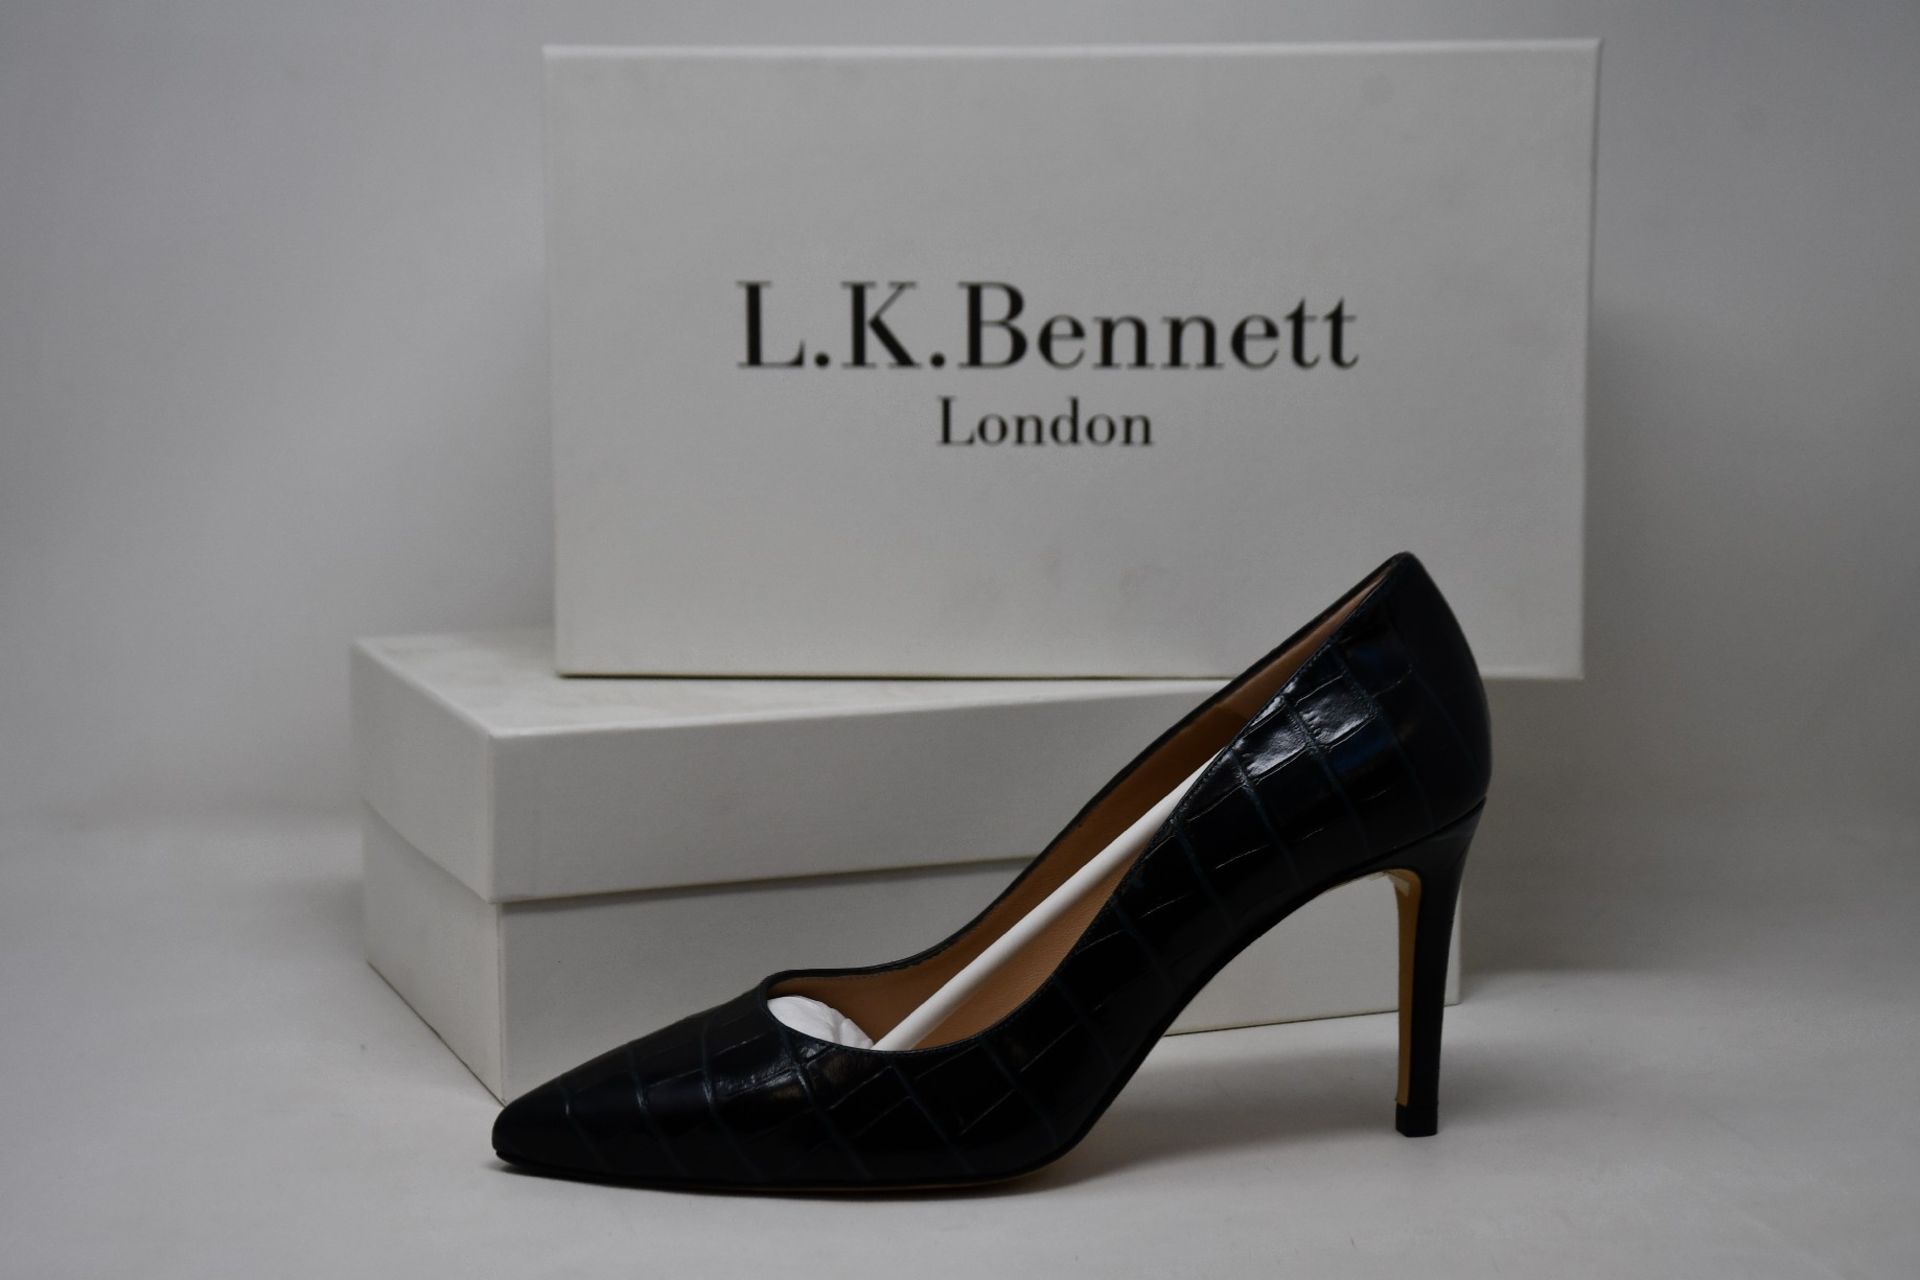 Two pairs of as new L.K.Bennett Floret shoes in teal croc effect (EU 40/EU 38 - RRP £229).